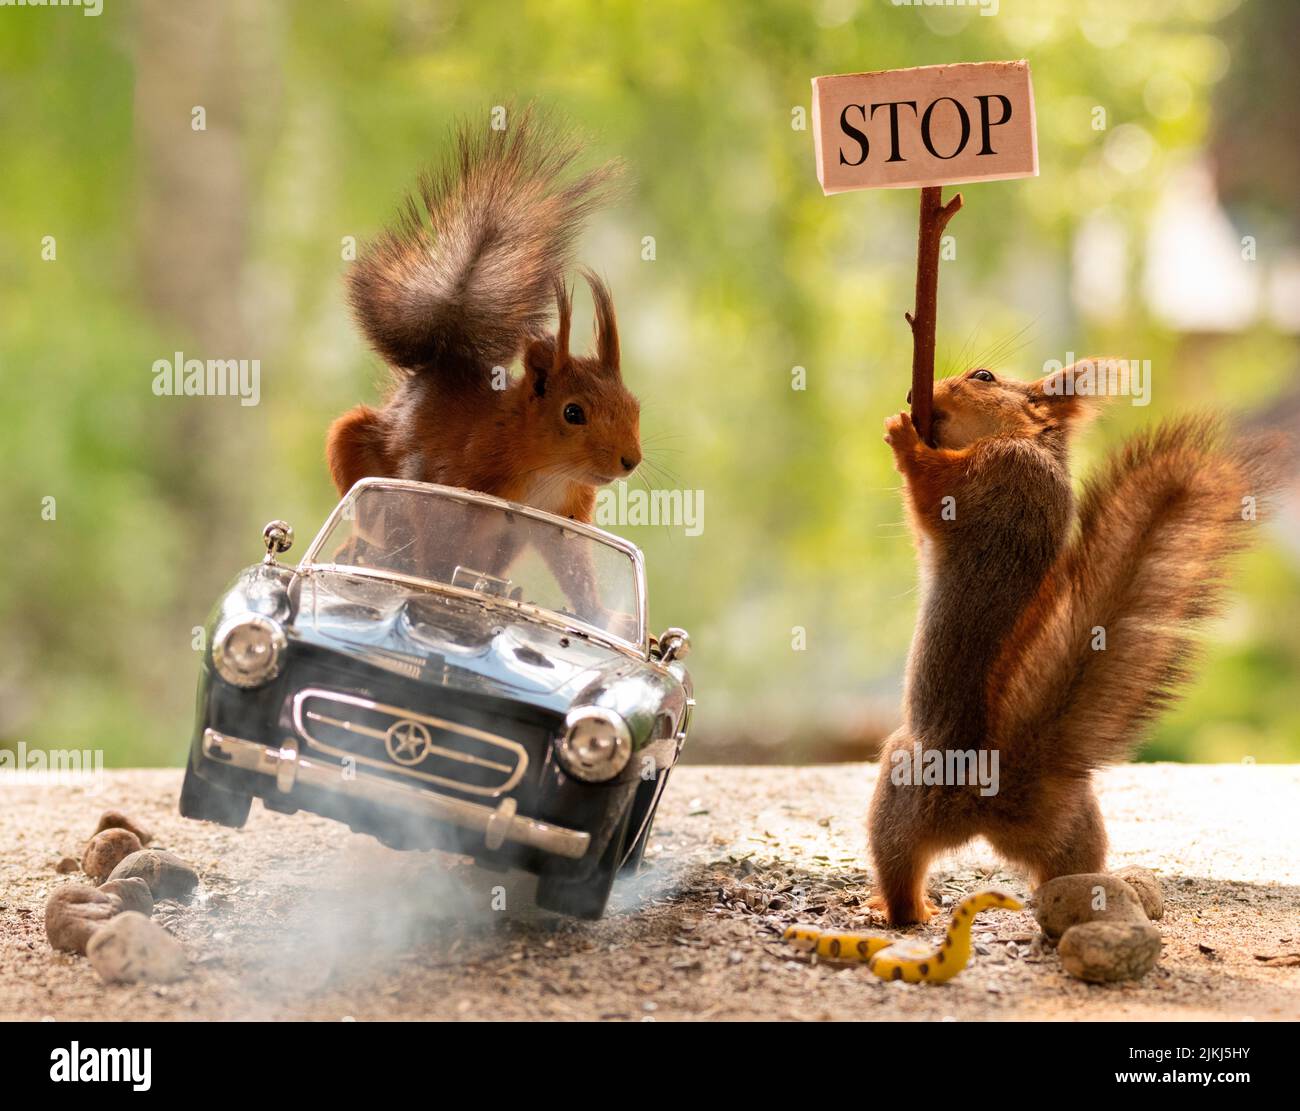 Red Squirrel is driving in a black car, another with stop sign Stock Photo